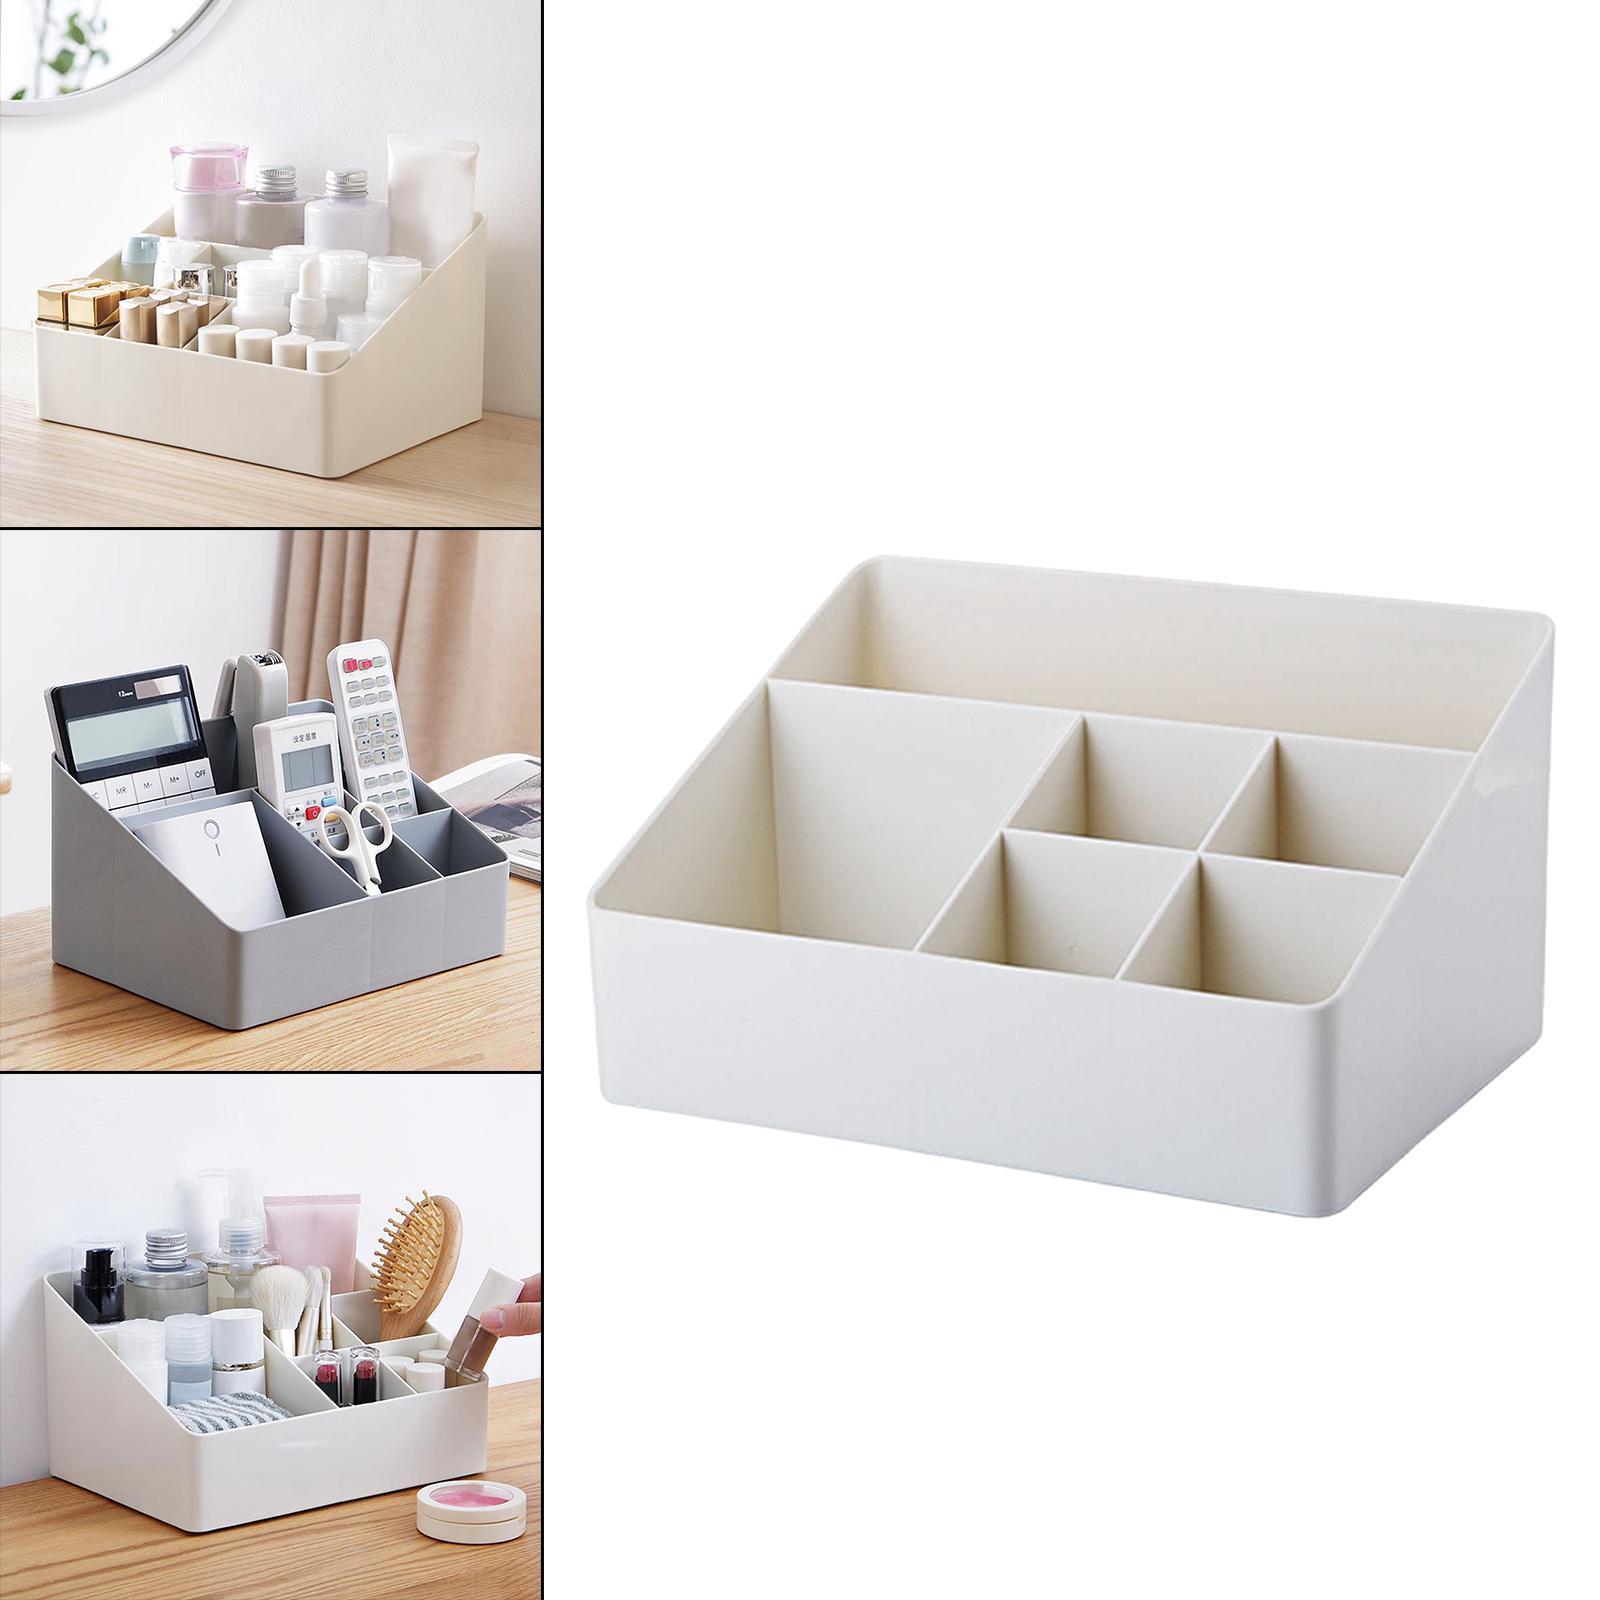 Cosmetic Storage Box Ladder Design Makeup Desk Organizer for Home Brushes White